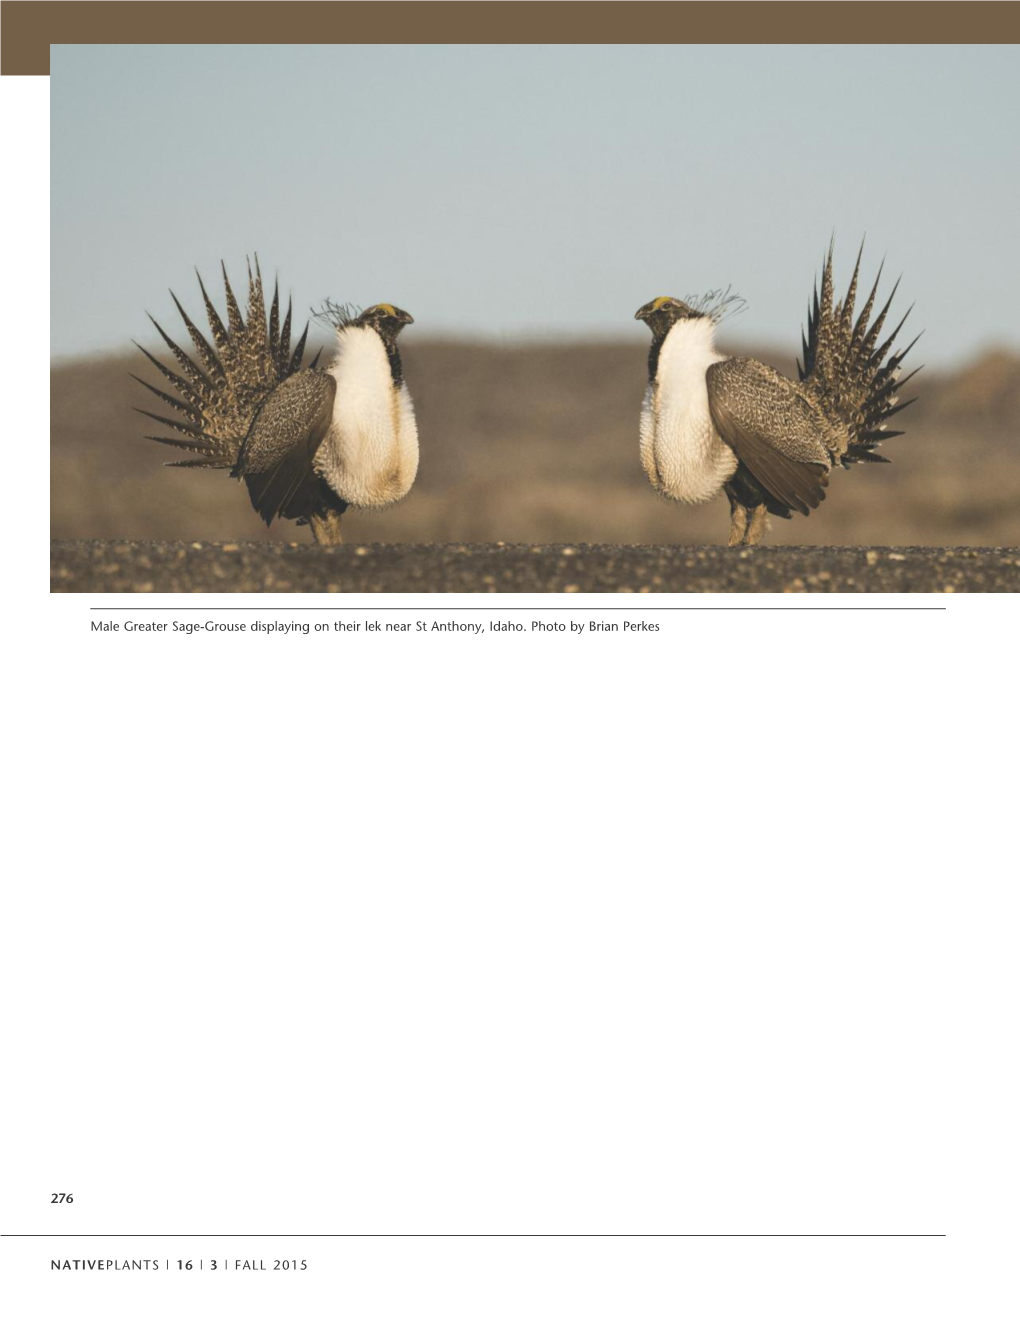 Conserving and Restoring Habitat for Greater Sage-Grouse and Other Sagebrush-Obligate Wildlife: the Crucial Link of Forbs and Sagebrush Diversity